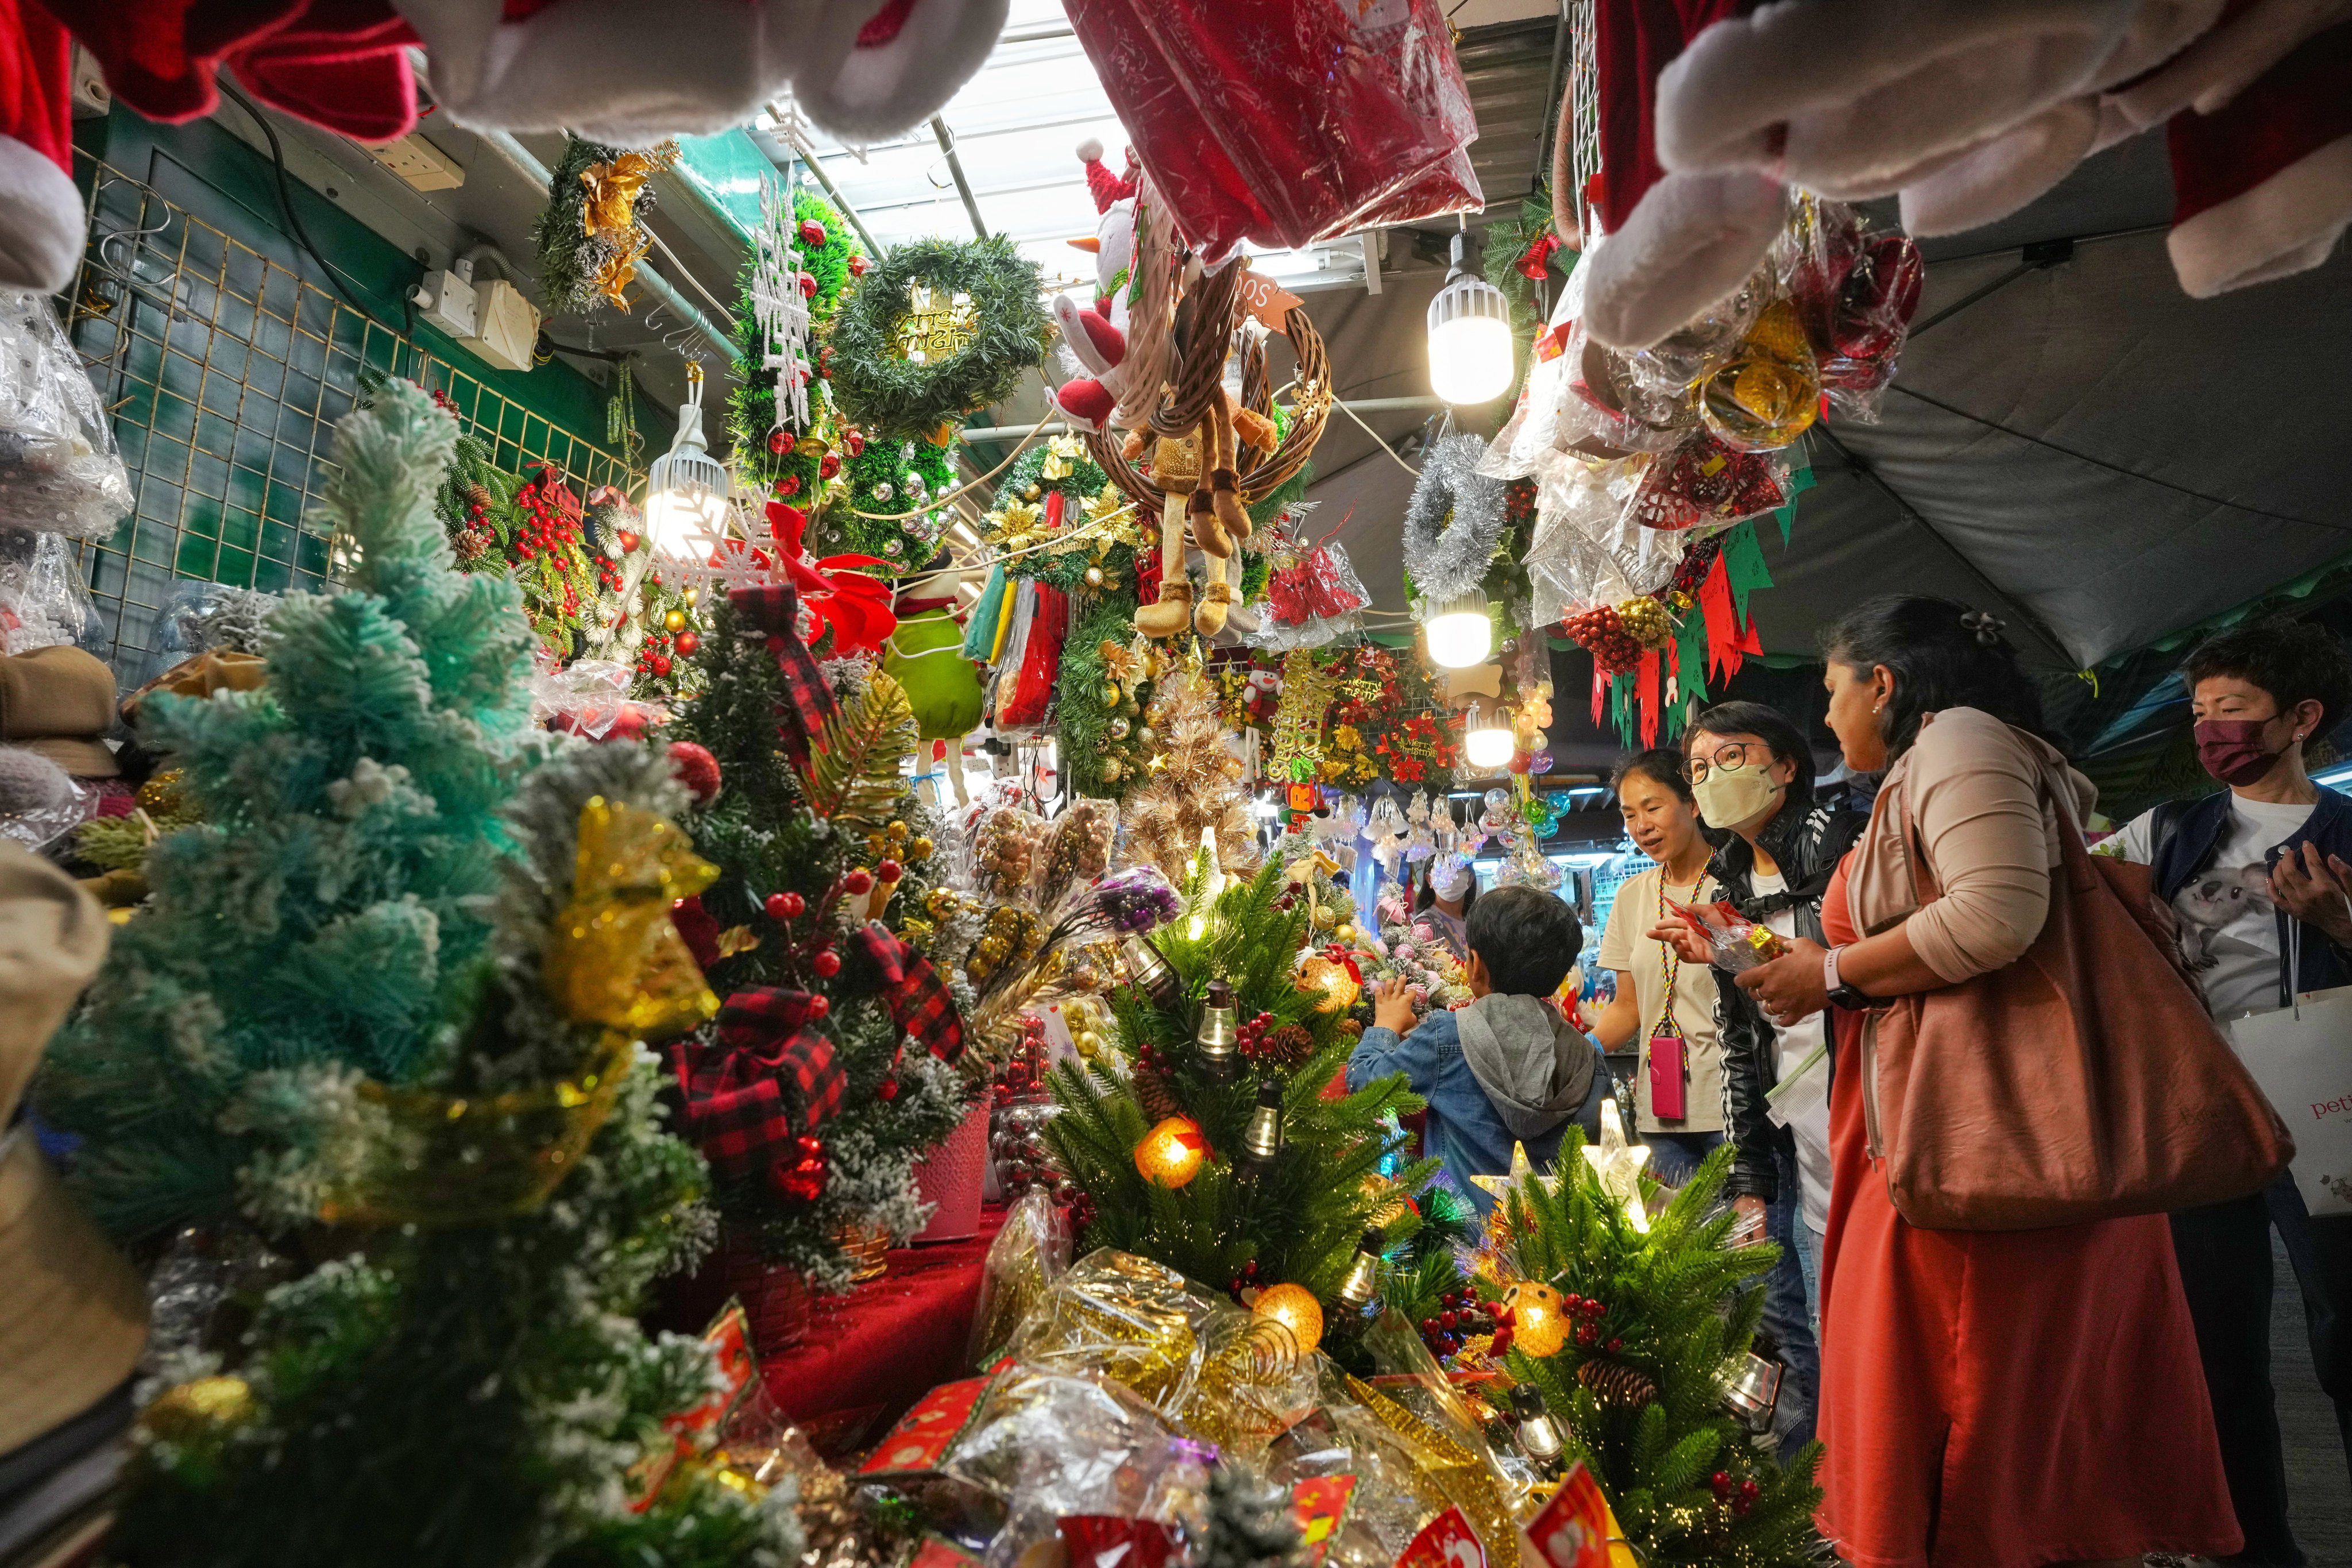 Shoppers browse for Christmas products at the stalls on Tai Yuen Street in Wan Chai. Photo: Elson LI